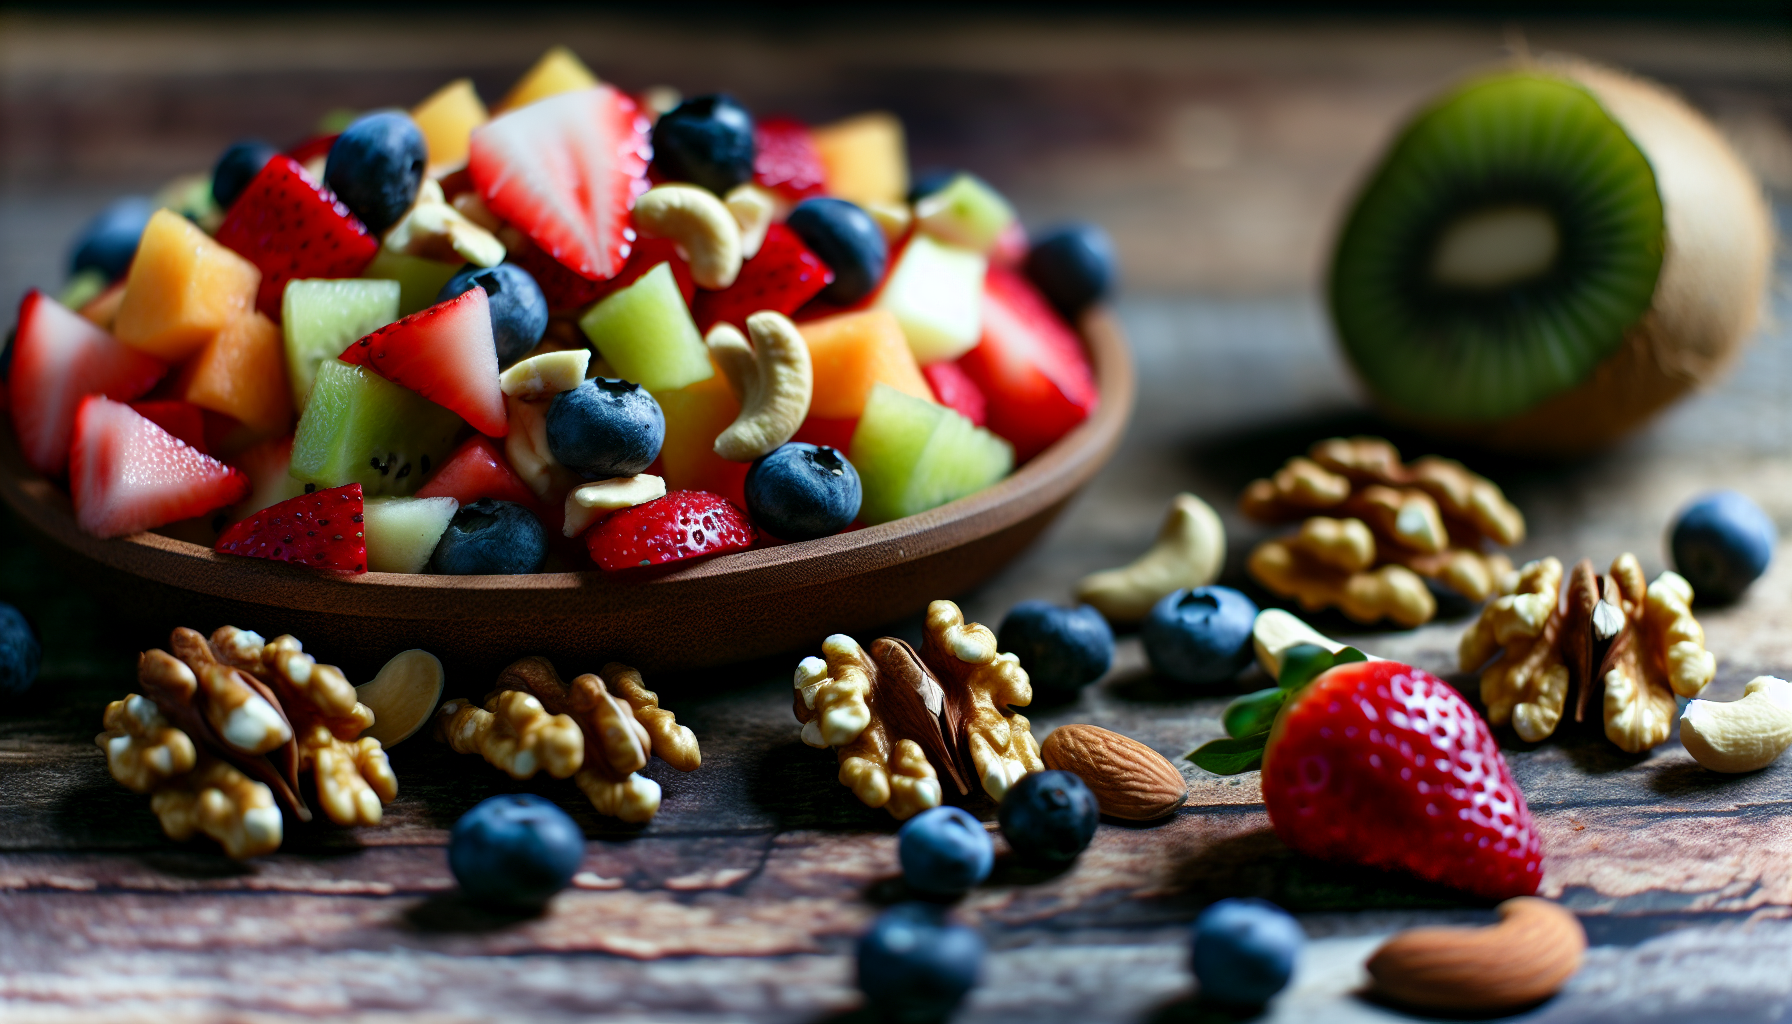 Assortment of chopped fruits and nuts